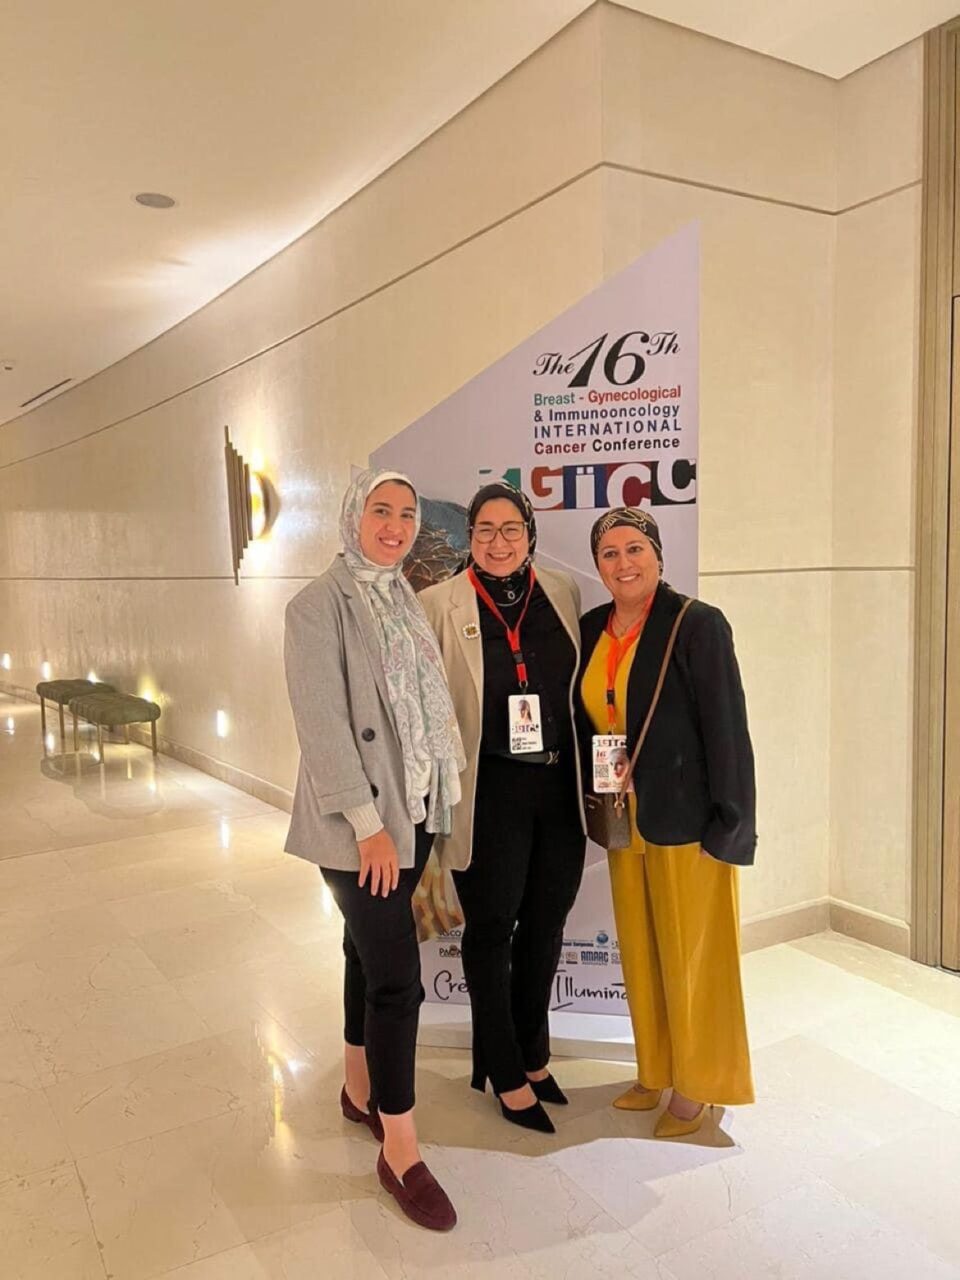 Rana Youness: I was honored to be invited as a guest speaker at the 16th Breast Gynecological and Immunooncology International Cancer Conference